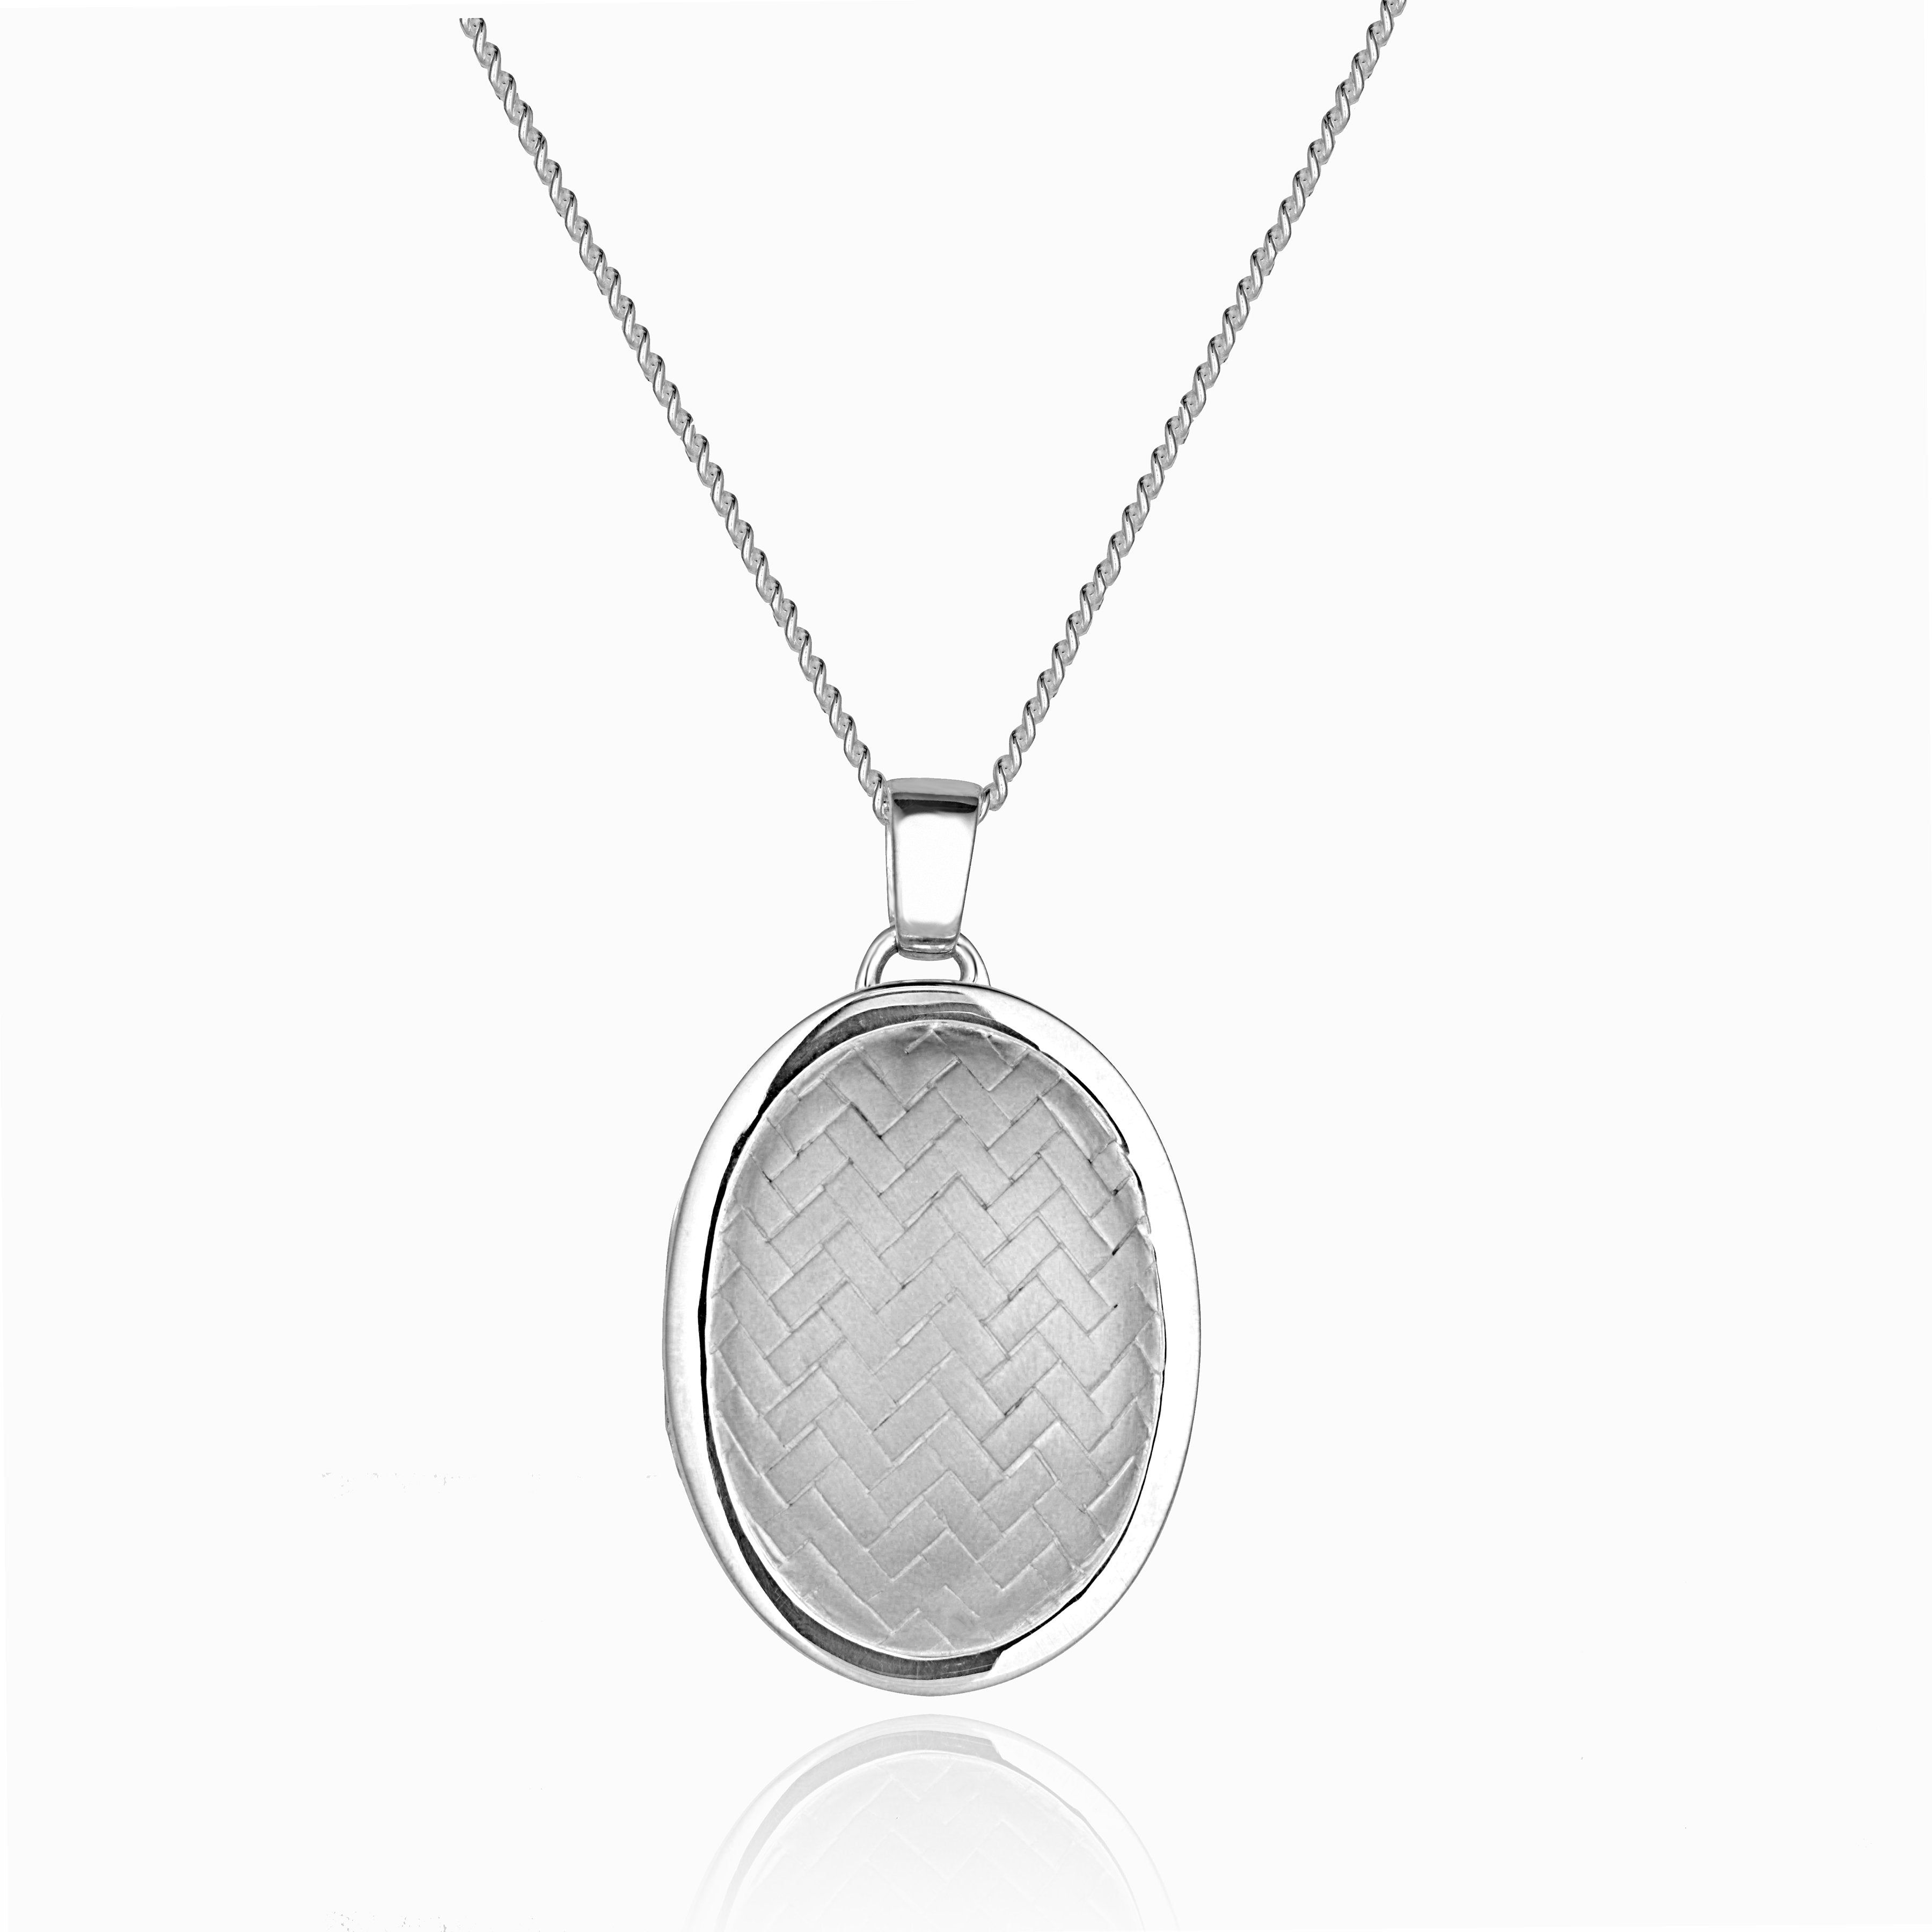 sterling silver oval locket with a herringbone design on the front, on a sterling silver curb chain